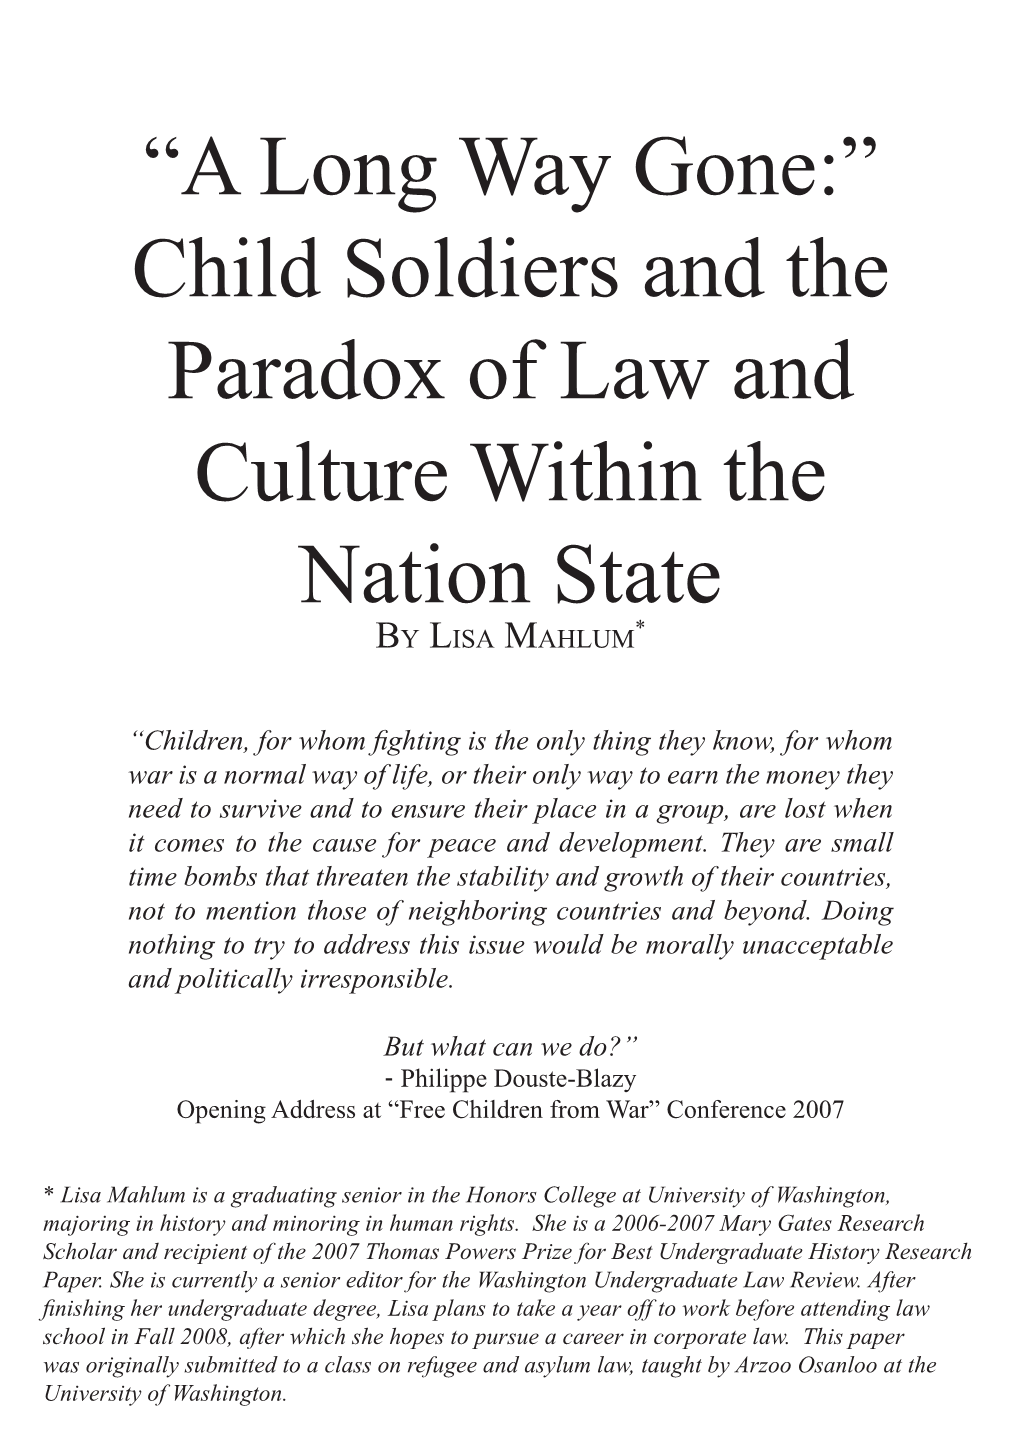 A Long Way Gone": Child Soldiers and the Paradox of Law and Culture Within the Nation State